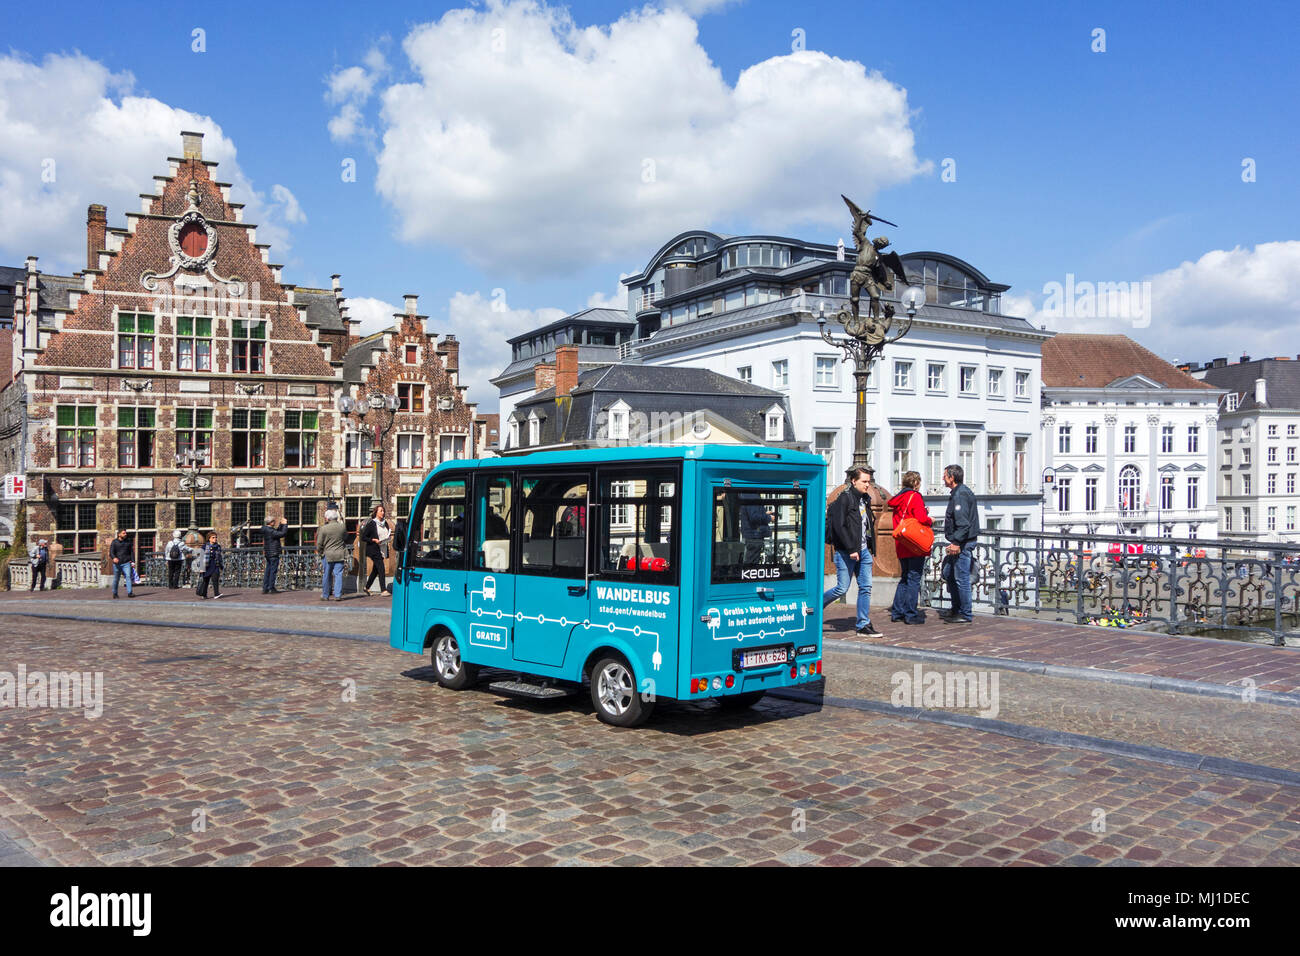 Keolis walking bus / Wandelbus, electric People Mover riding in the pedestrianised area in the historic city centre of Ghent, East Flanders, Belgium Stock Photo